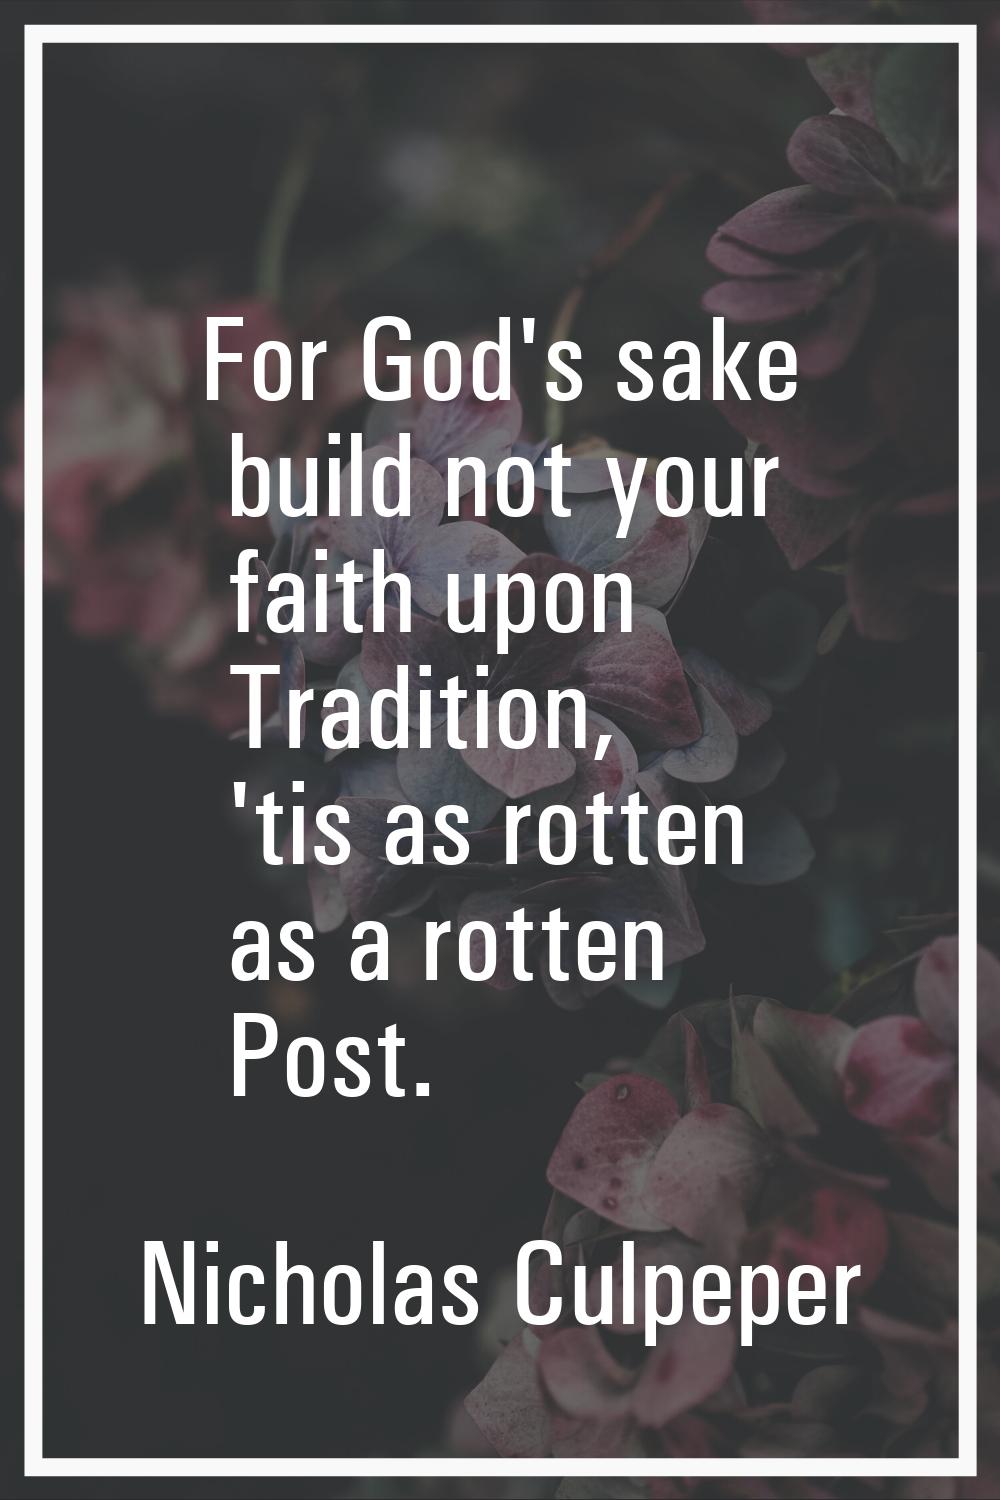 For God's sake build not your faith upon Tradition, 'tis as rotten as a rotten Post.